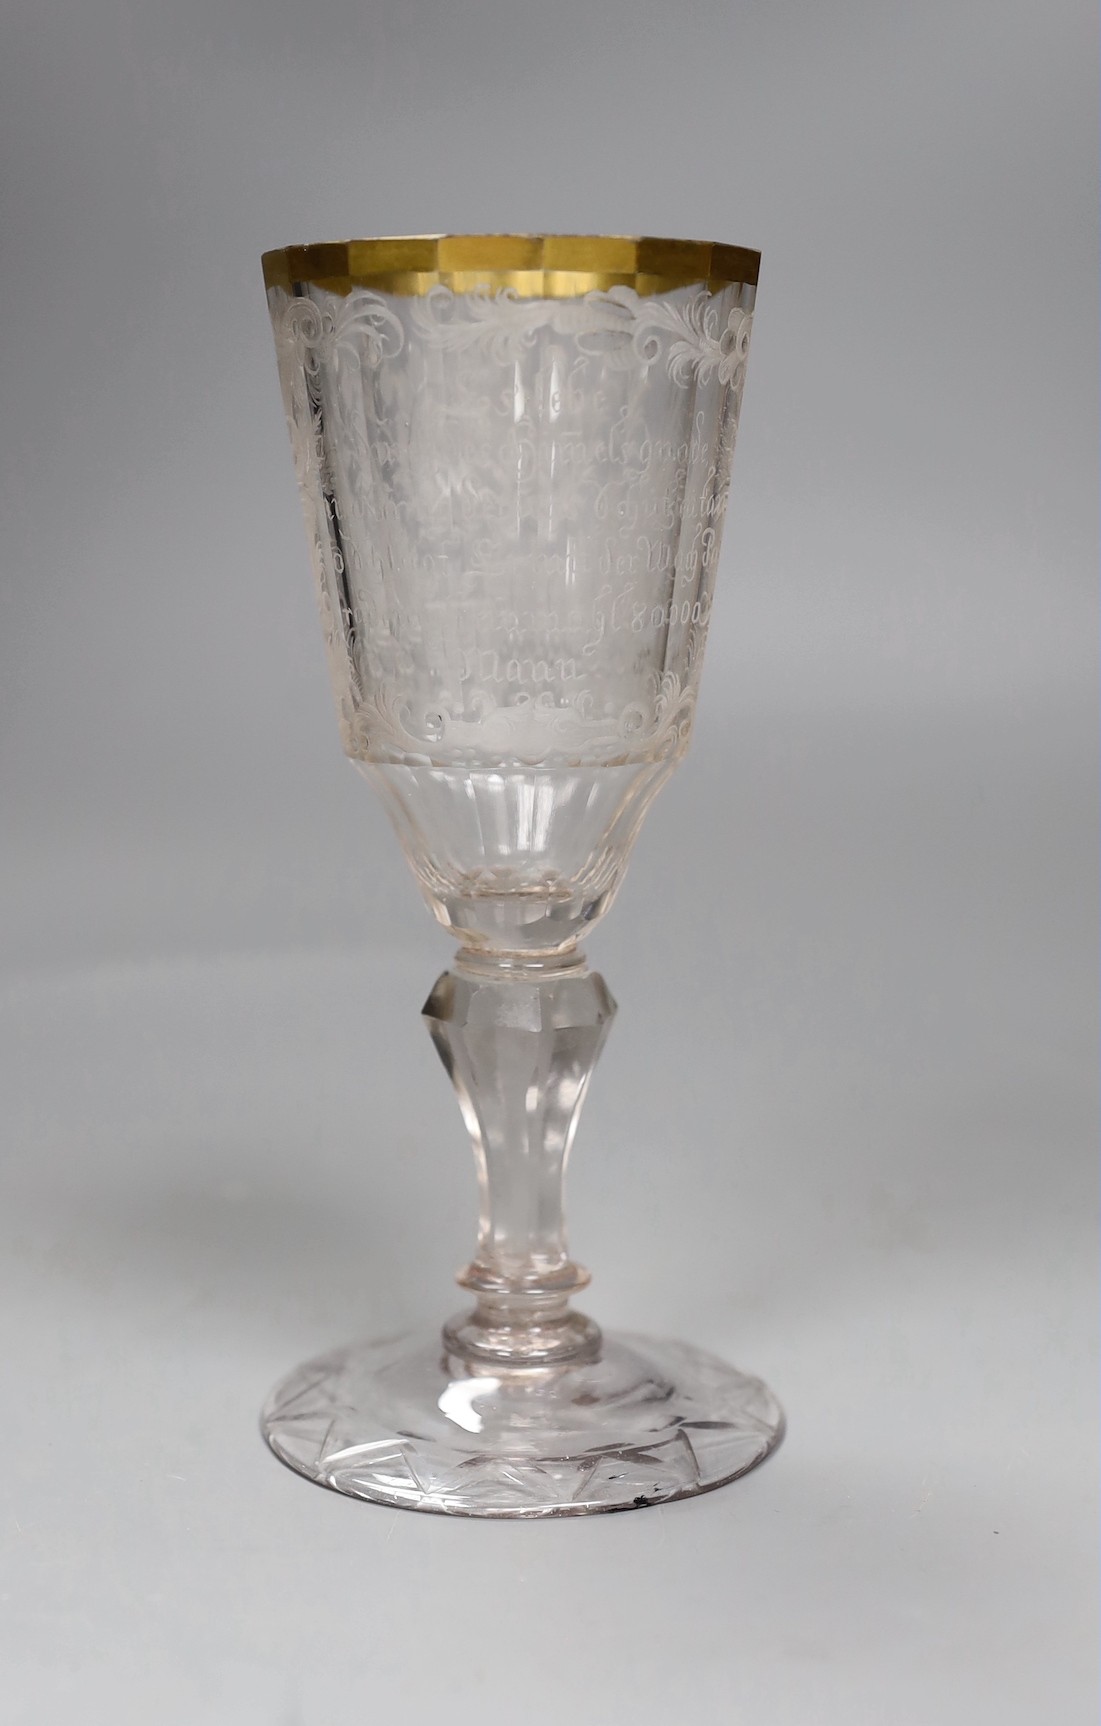 A mid 18th century German/Bohemian glass with military engraving, 17cms high